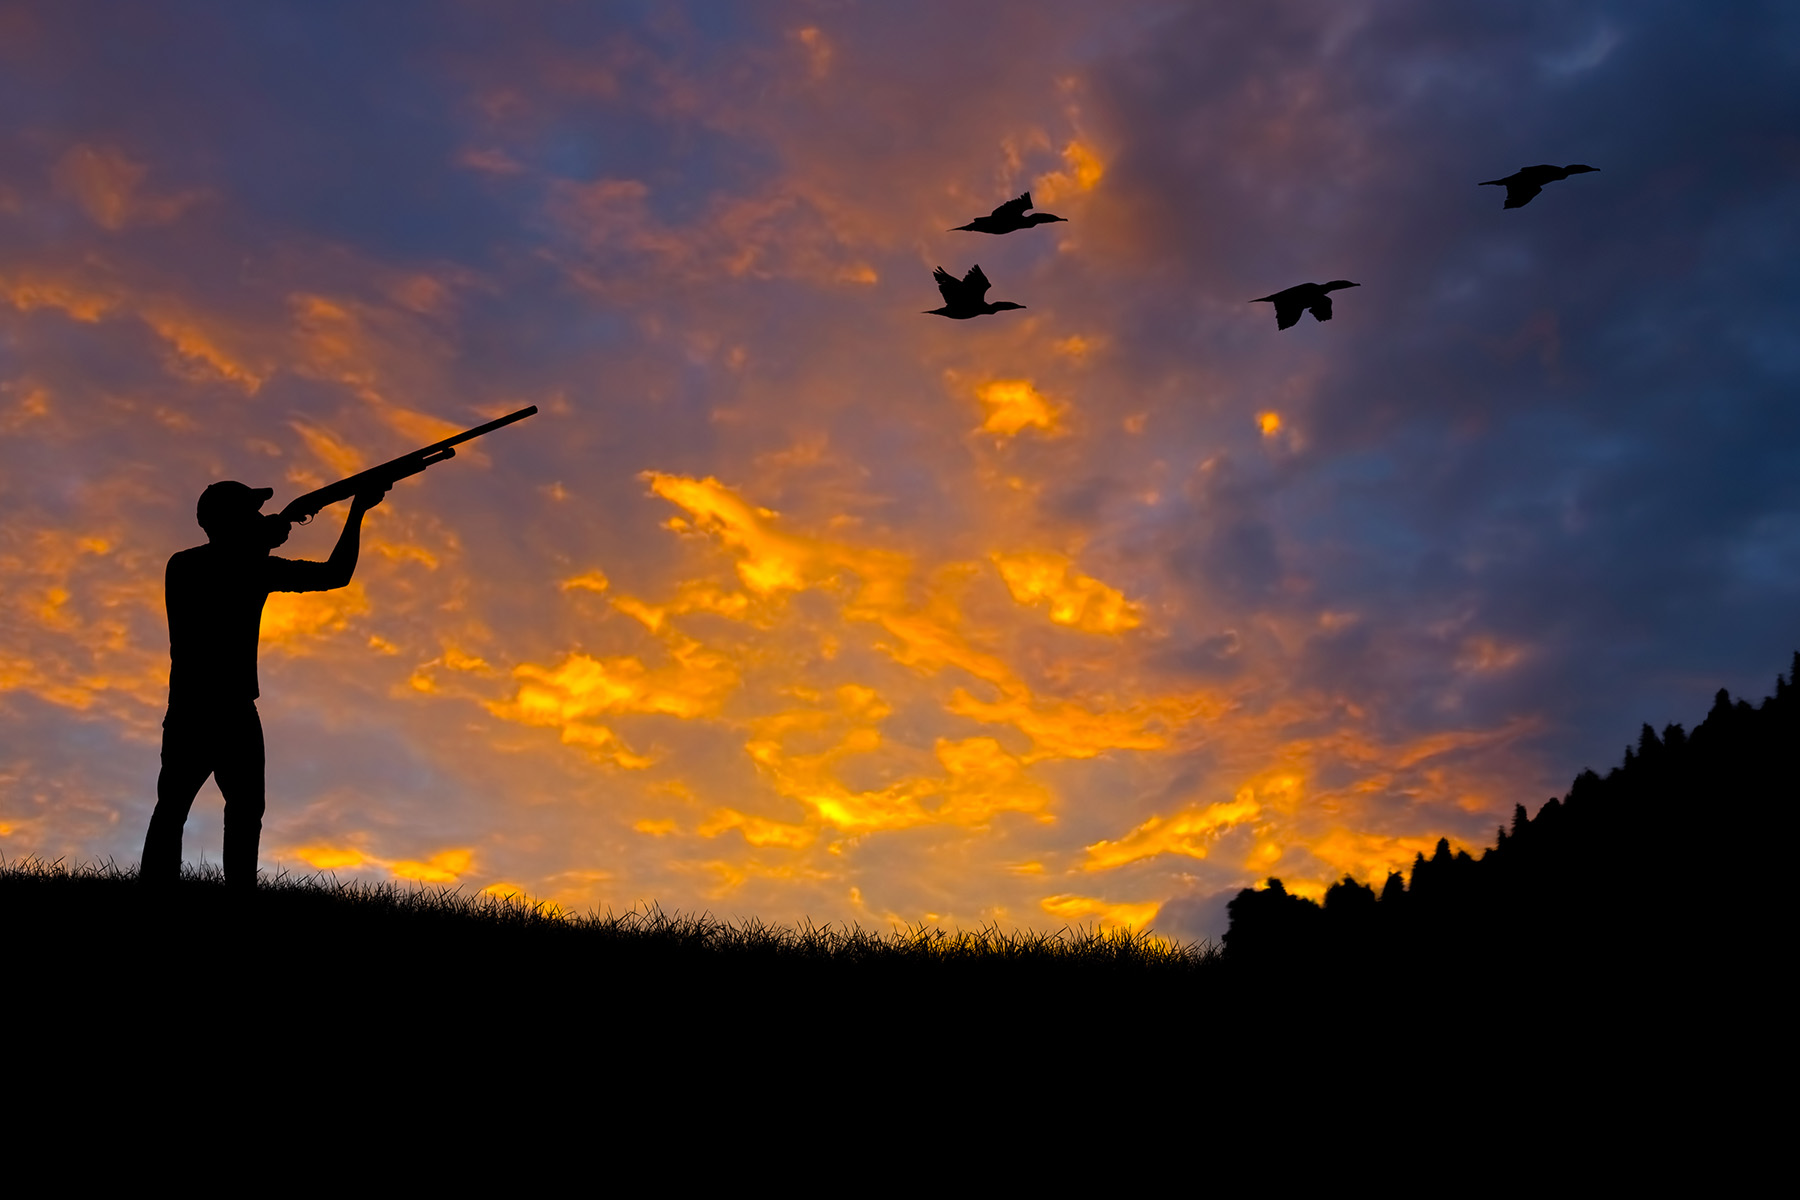 All signs point to exceptional dovehunting season WilliamsGrand